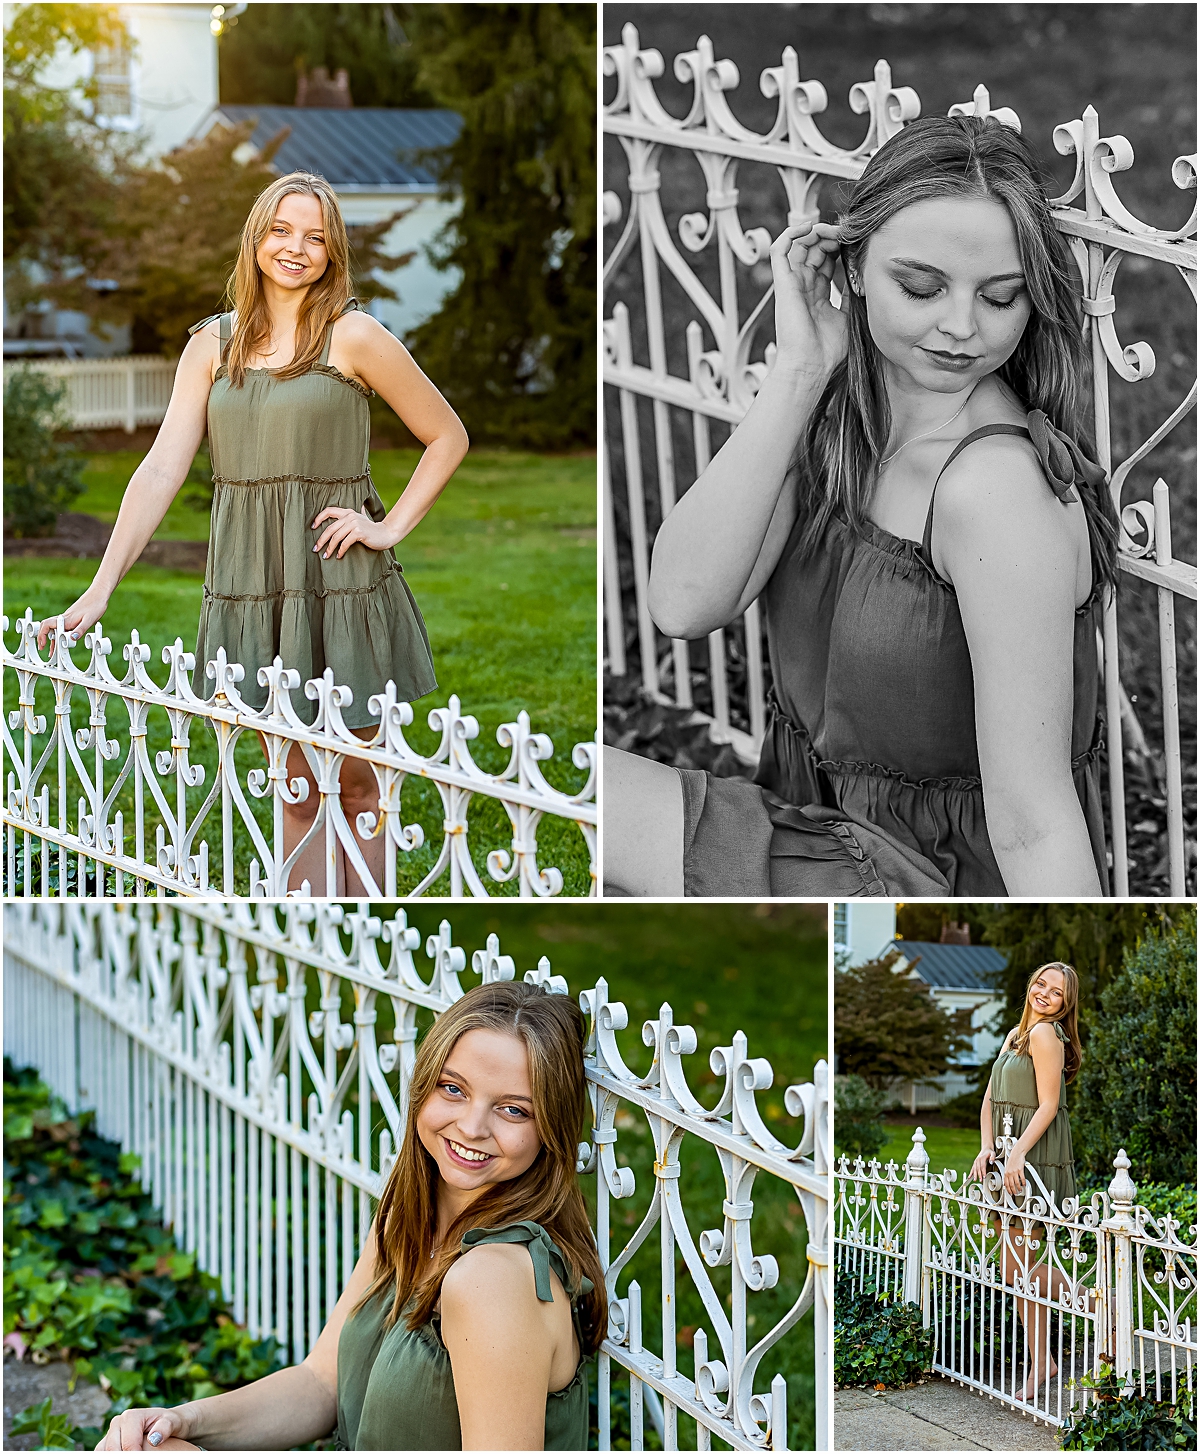 Brooke posing in front of a white iron fence  